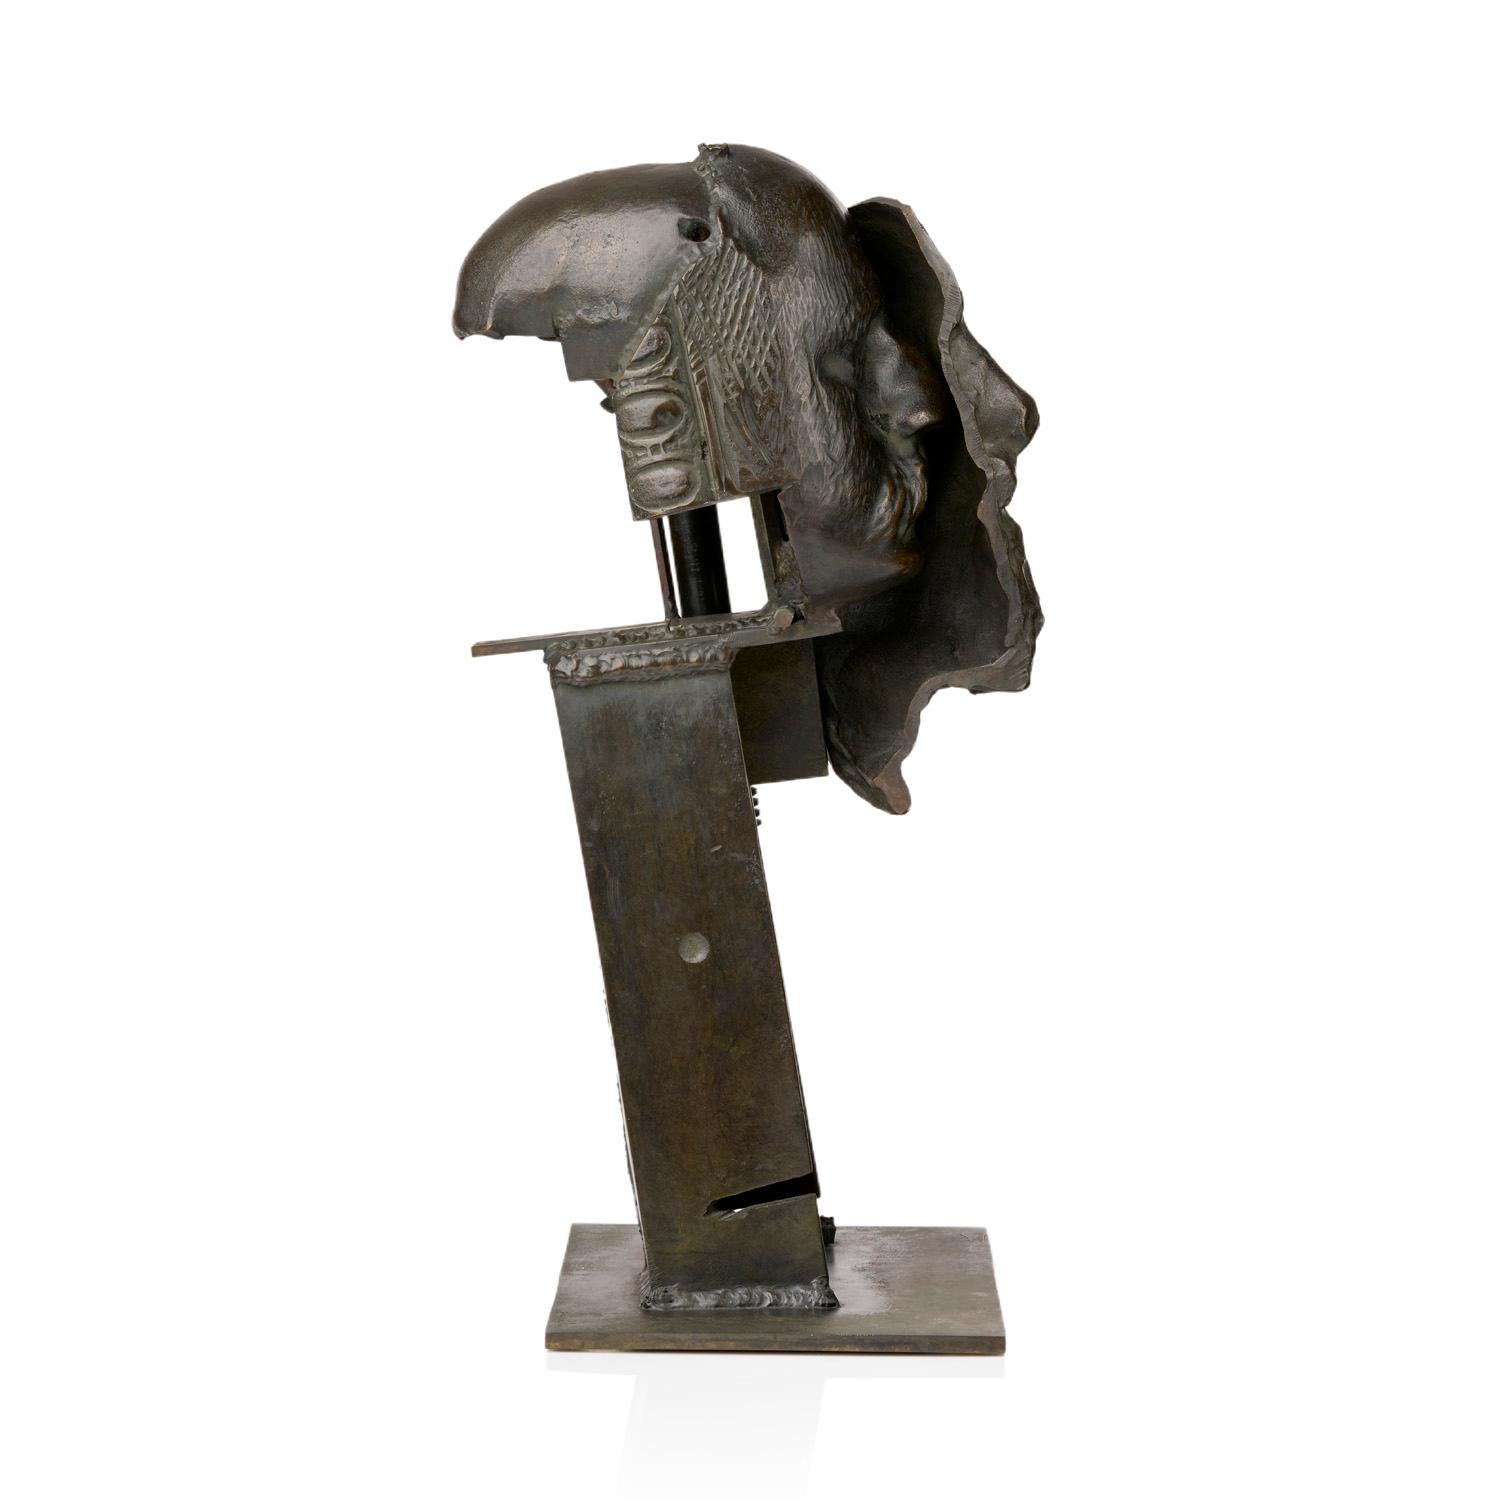 Napoléon.
(Epruve d’artiste EA 1/2)
Bocquel fondeur. 
Acquired directly from the artist.  
Signed by the artist. 

César Baldaccini (1921 – 1998) is one of the great sculptors of the twentieth century. As a young man he took a stand for art that was